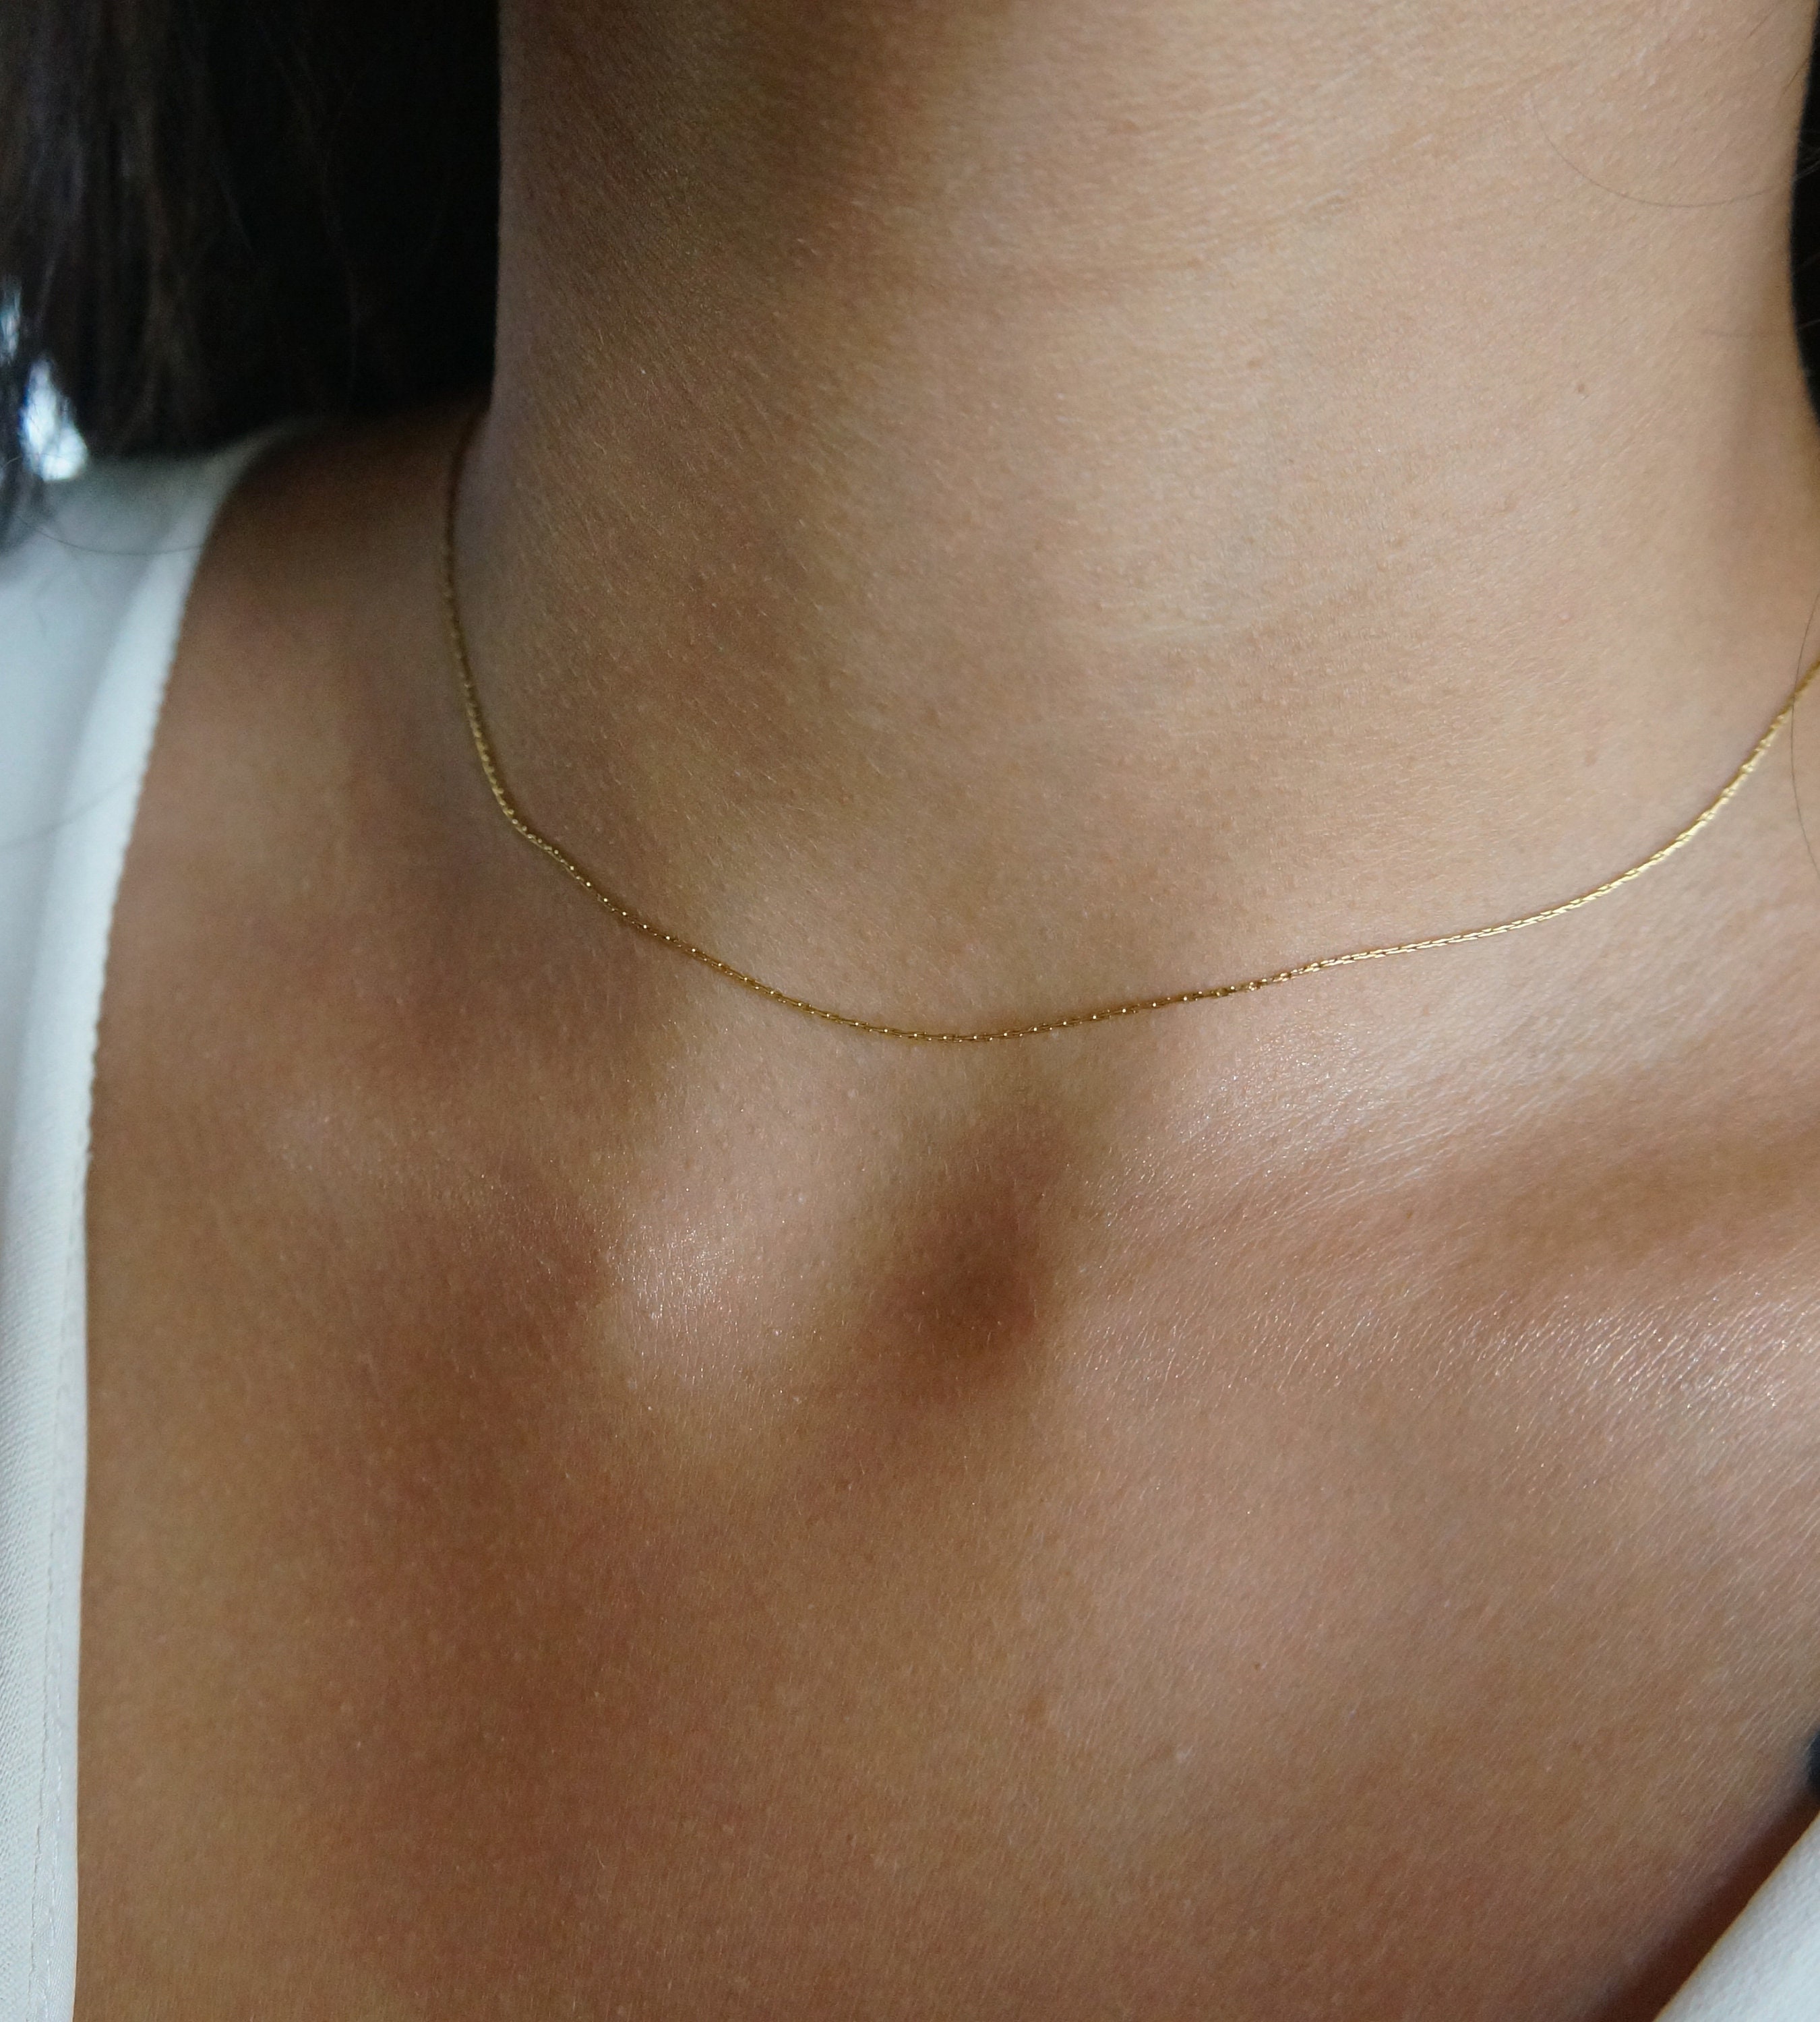 Gold Dainty Snake Chain Thread Chain Choker Ultra Thin Chain Necklace Tiny  Necklace Simple Chain Necklace in Gold